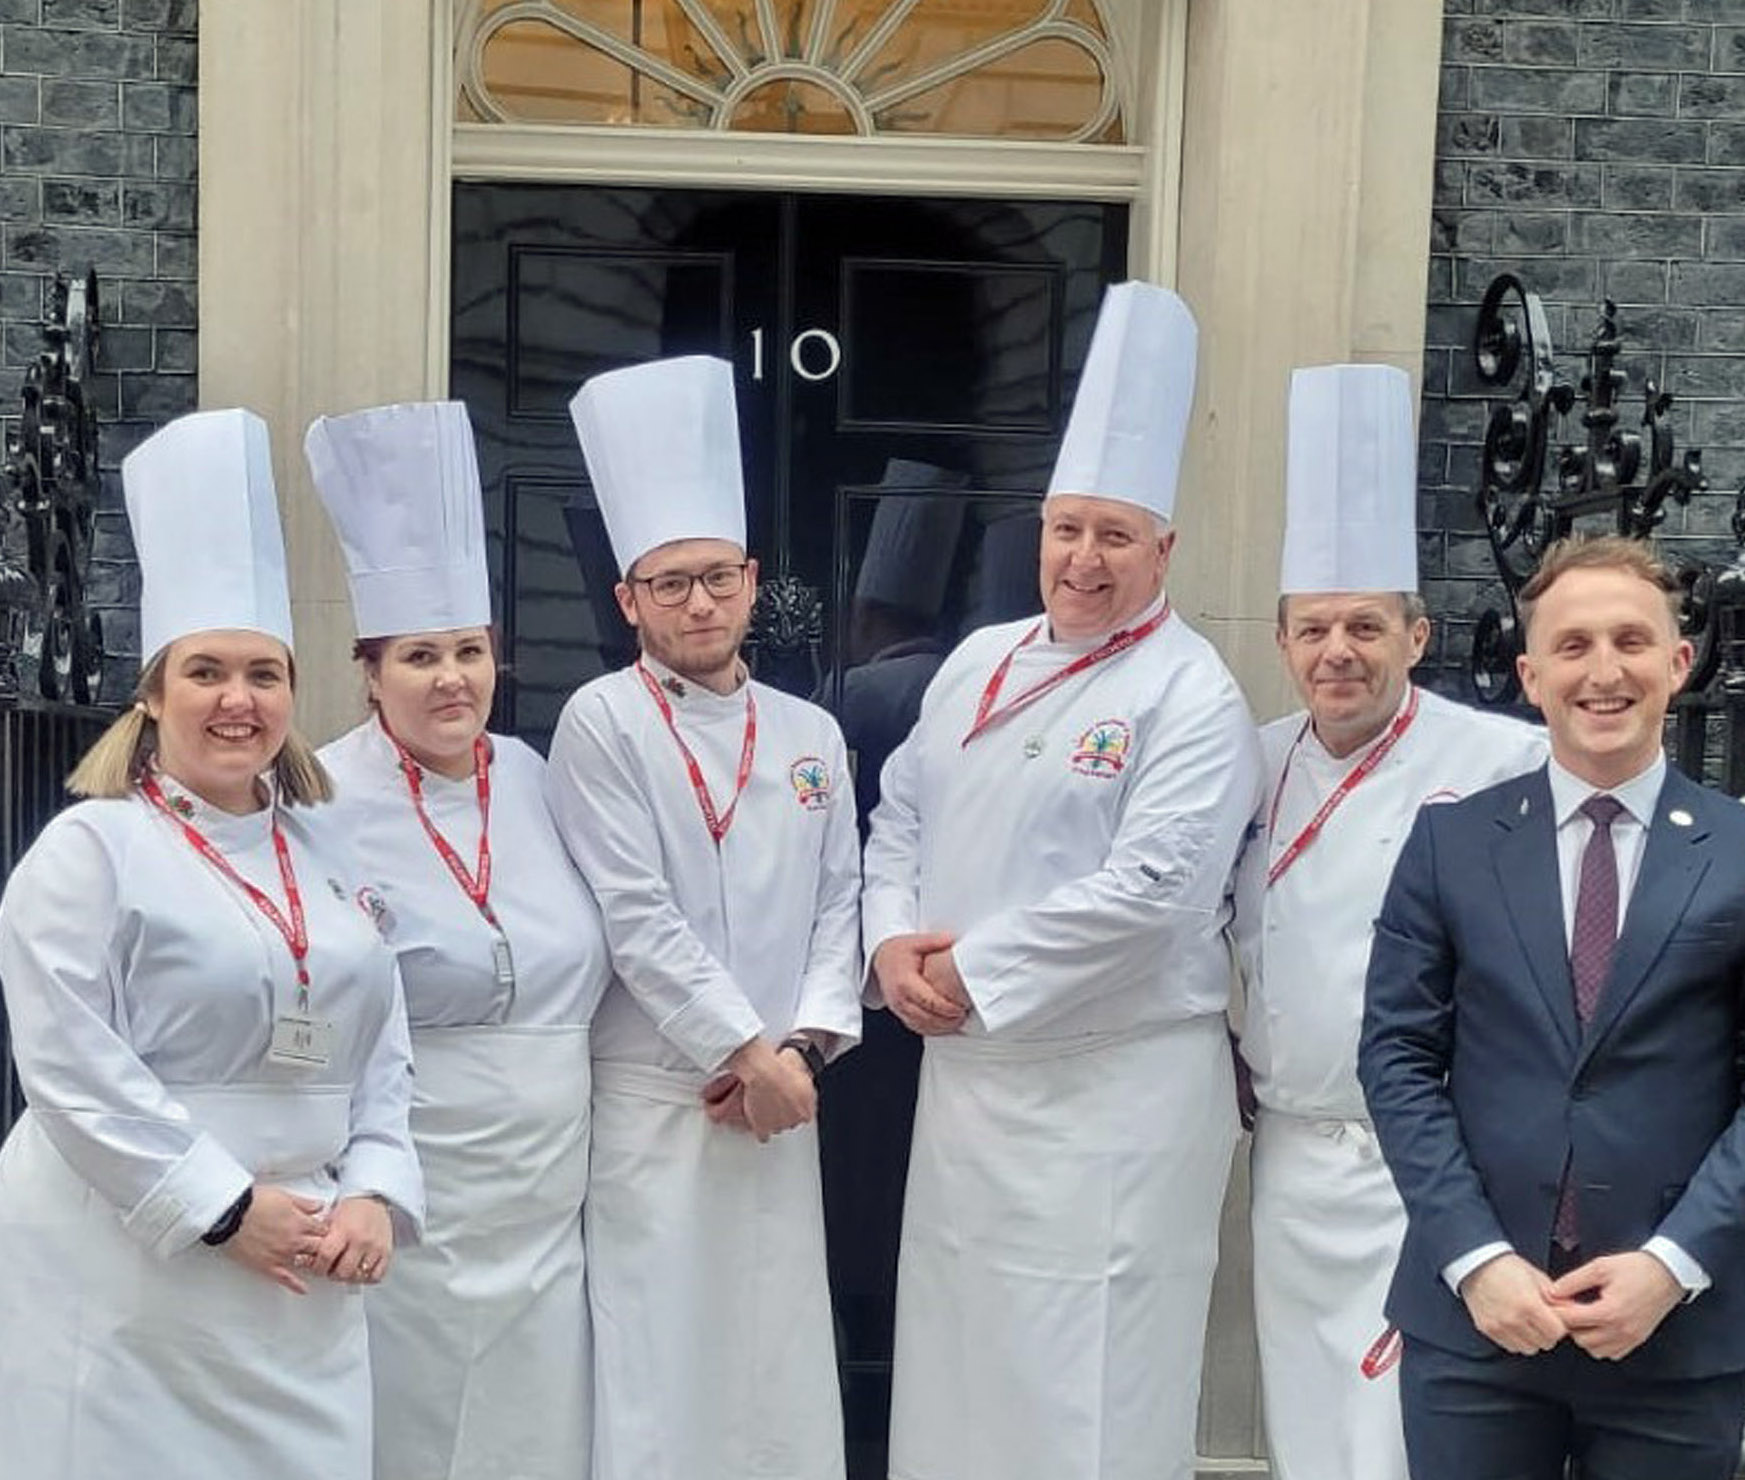 Welsh chefs meet Prime Minister at 10 Downing Street St David’s Day event